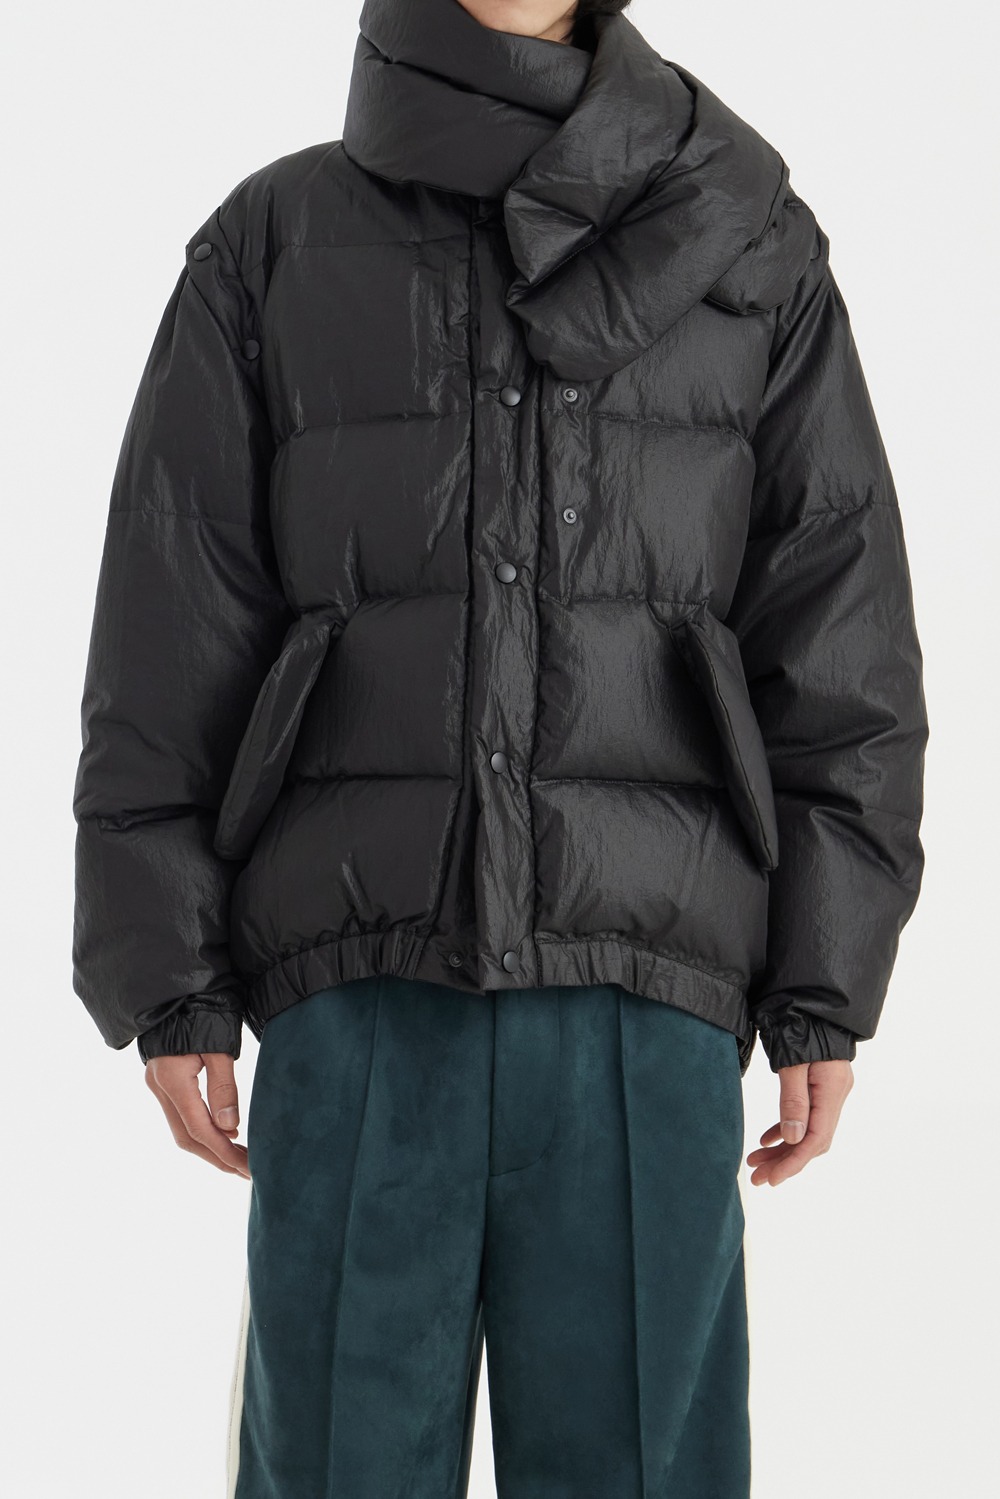 Back To The Down Jacket - Black